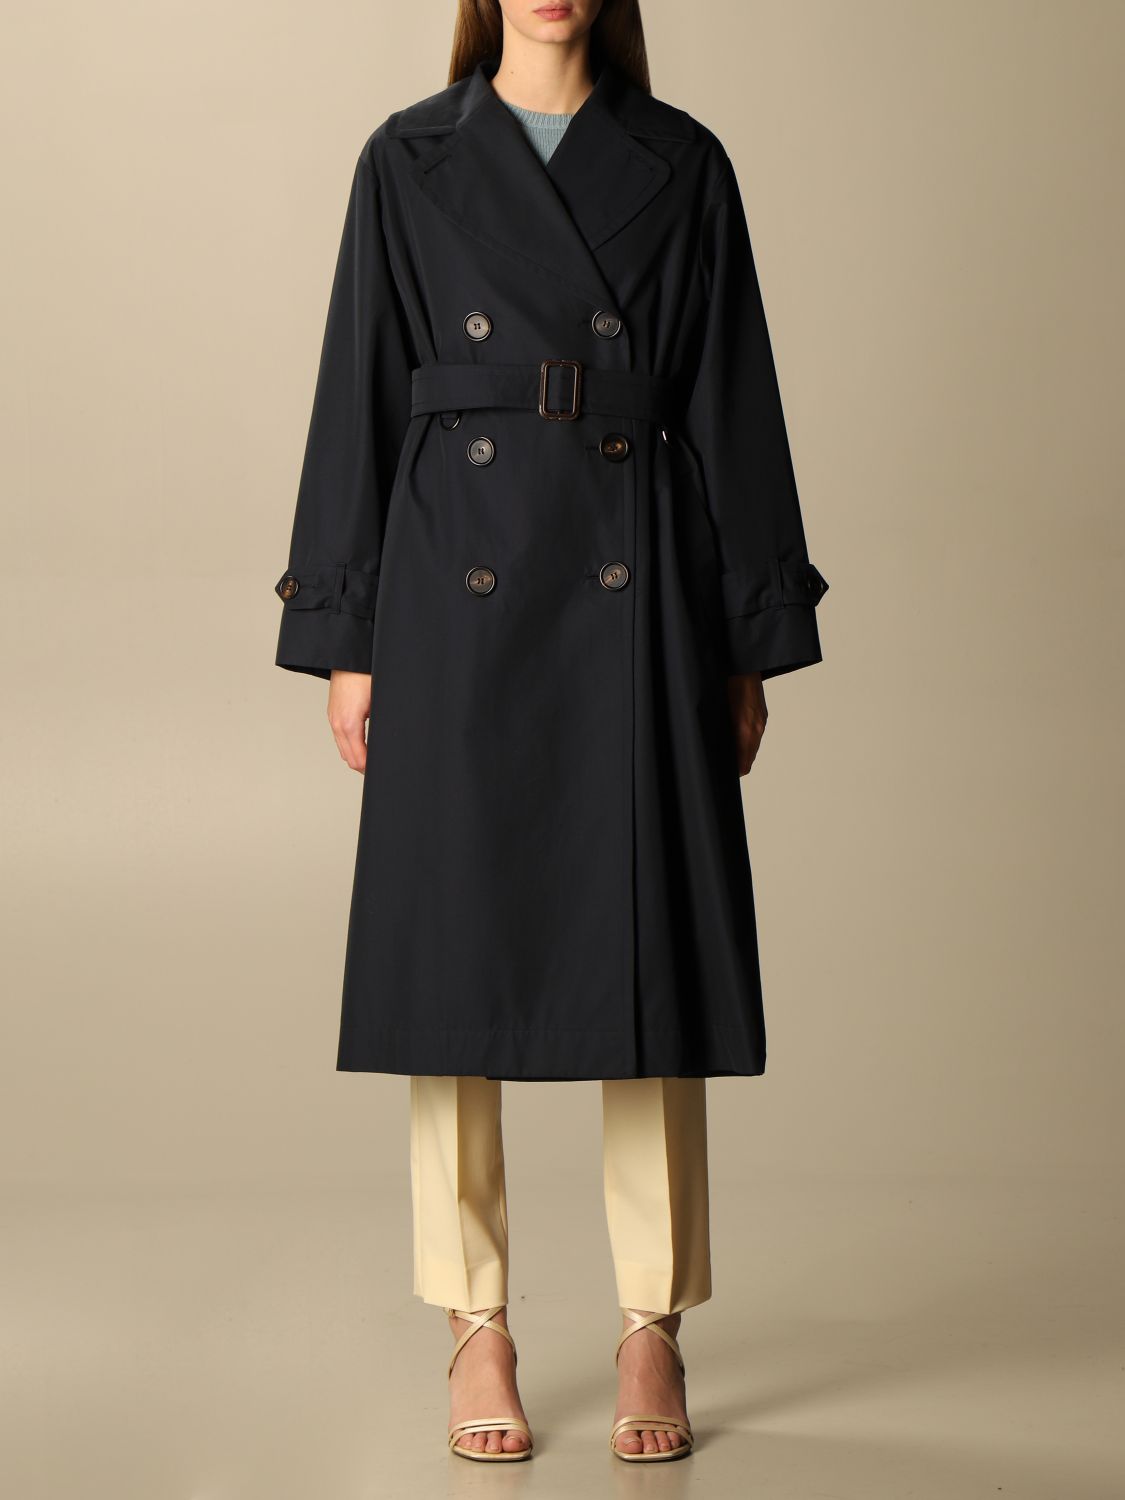 MAX MARA THE CUBE: Dimper double-breasted trench coat - Blue | Max Mara ...